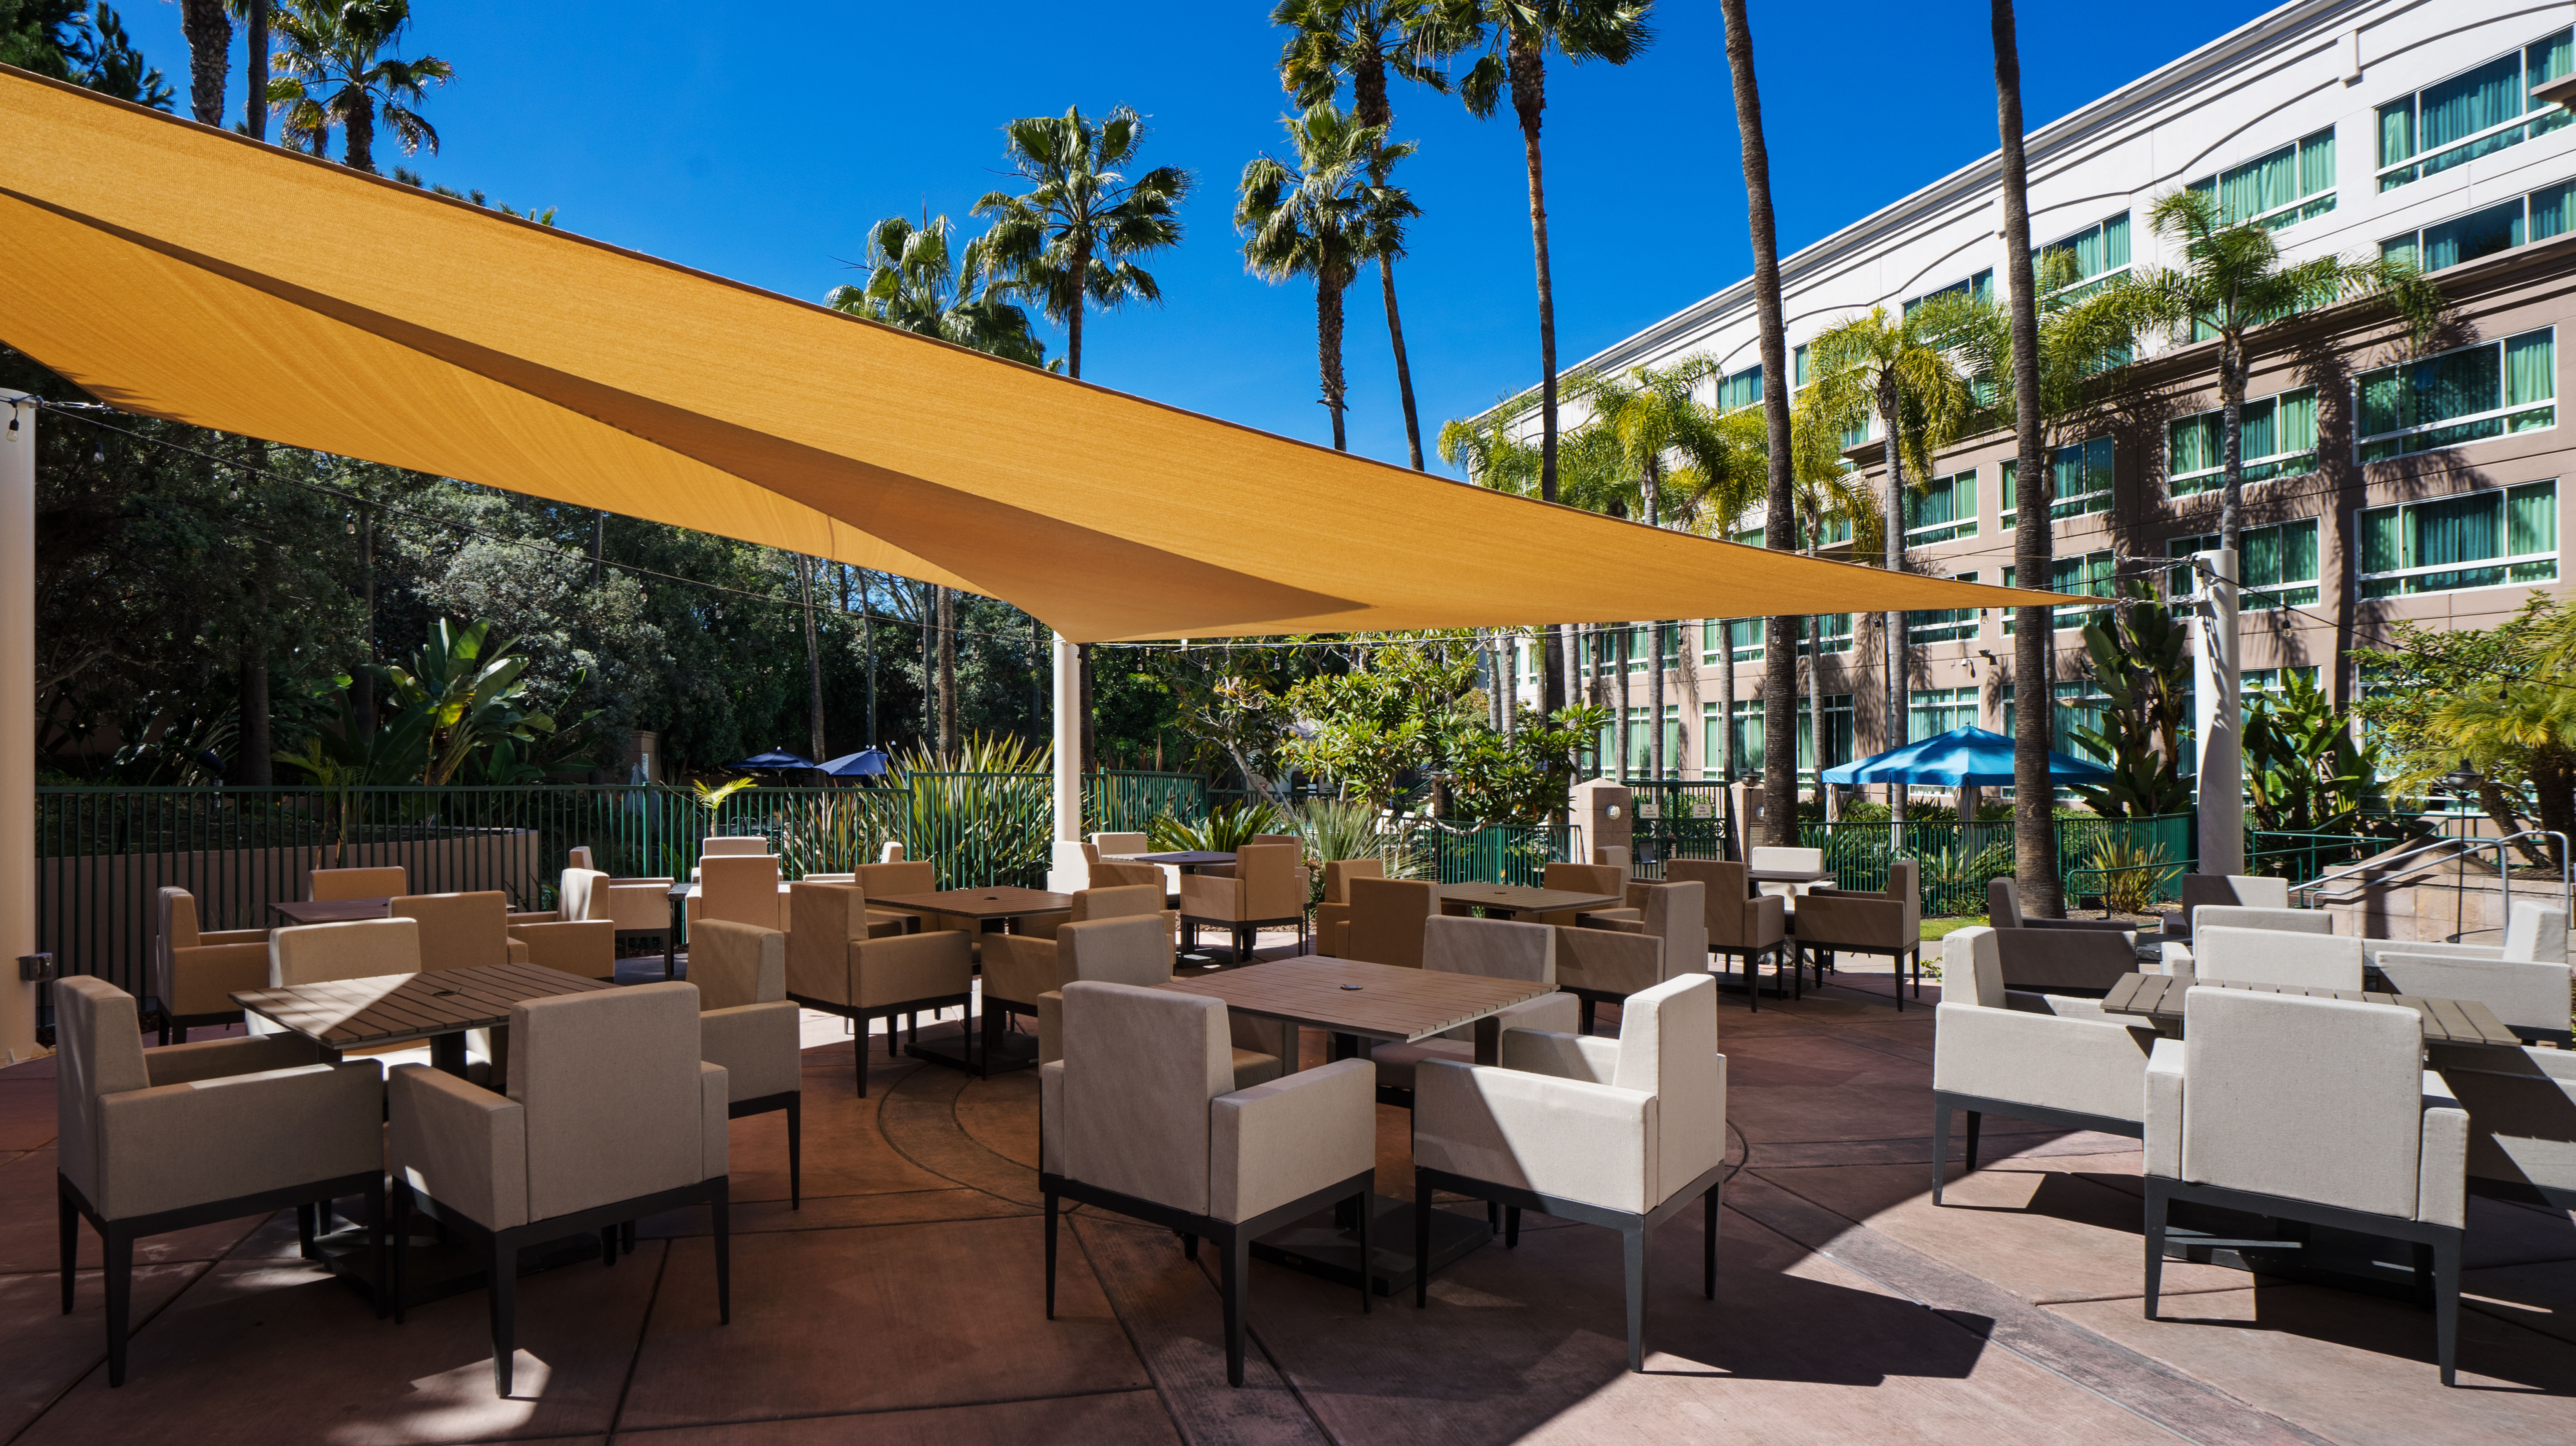 Outdoor Patio with Tables, Chairs and Canopy Cover